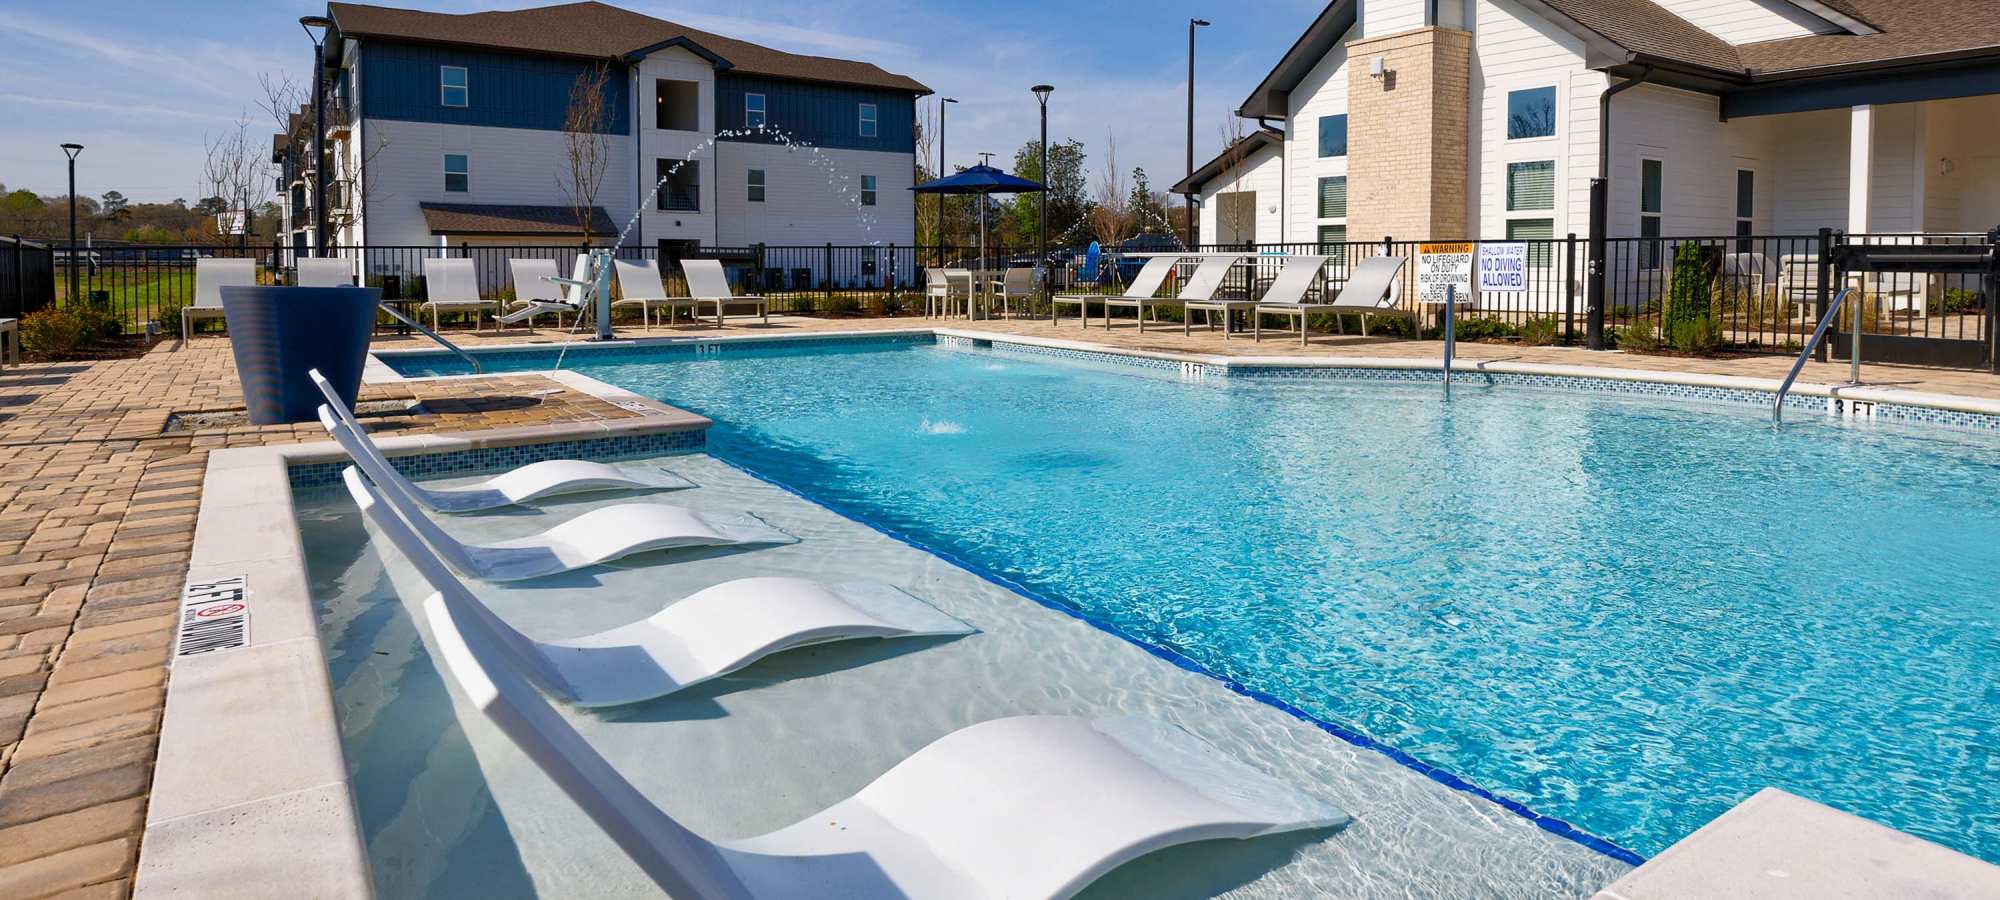 Amenities at The Massell in Cartersville, Georgia 